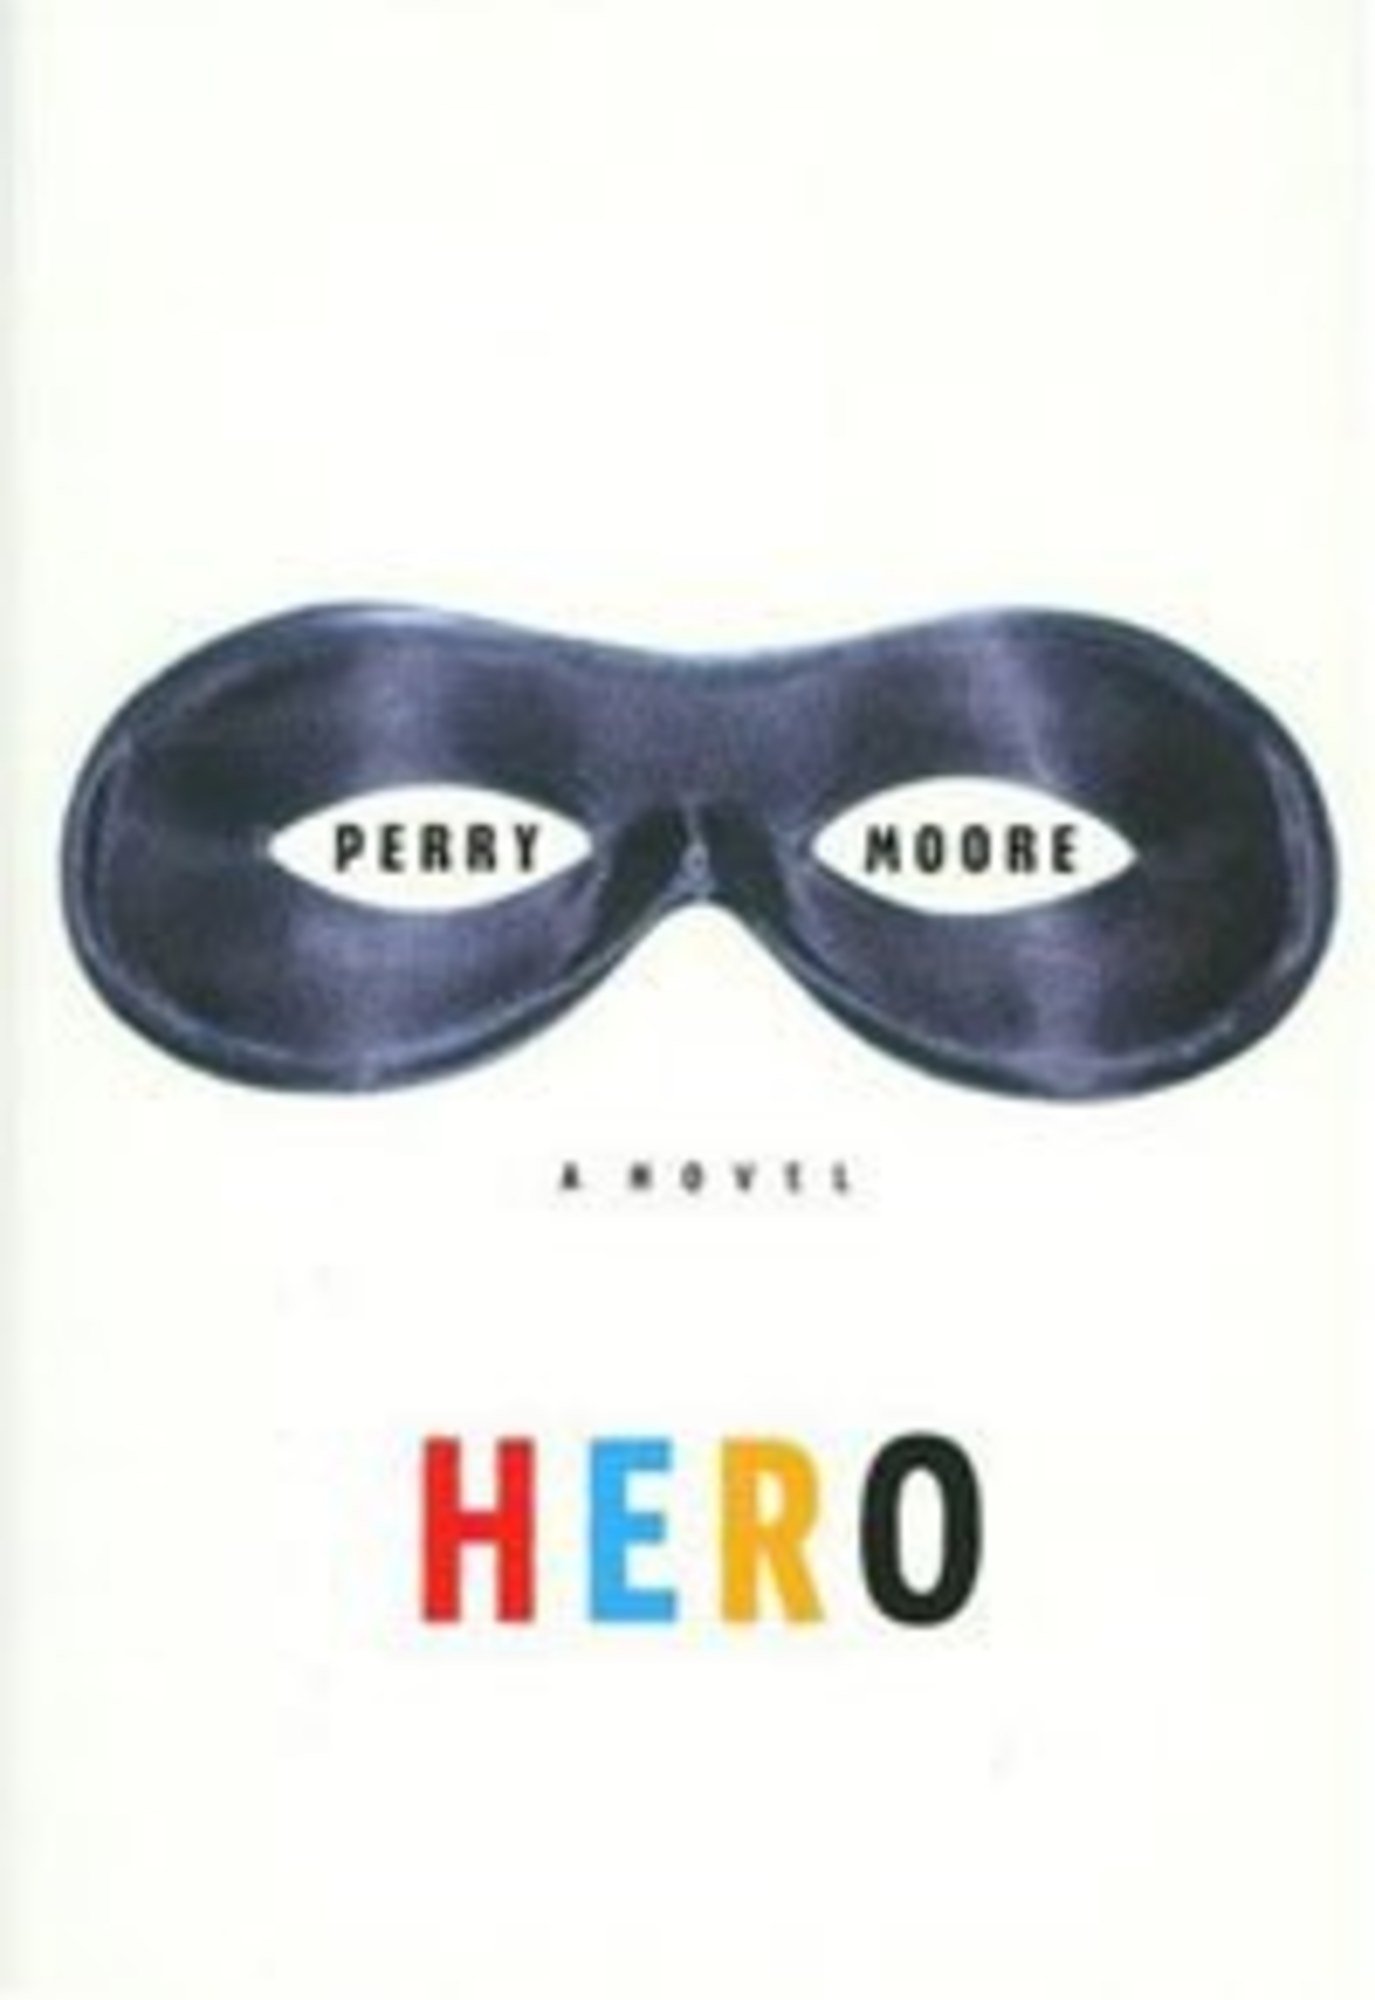 books like hero by perry moore